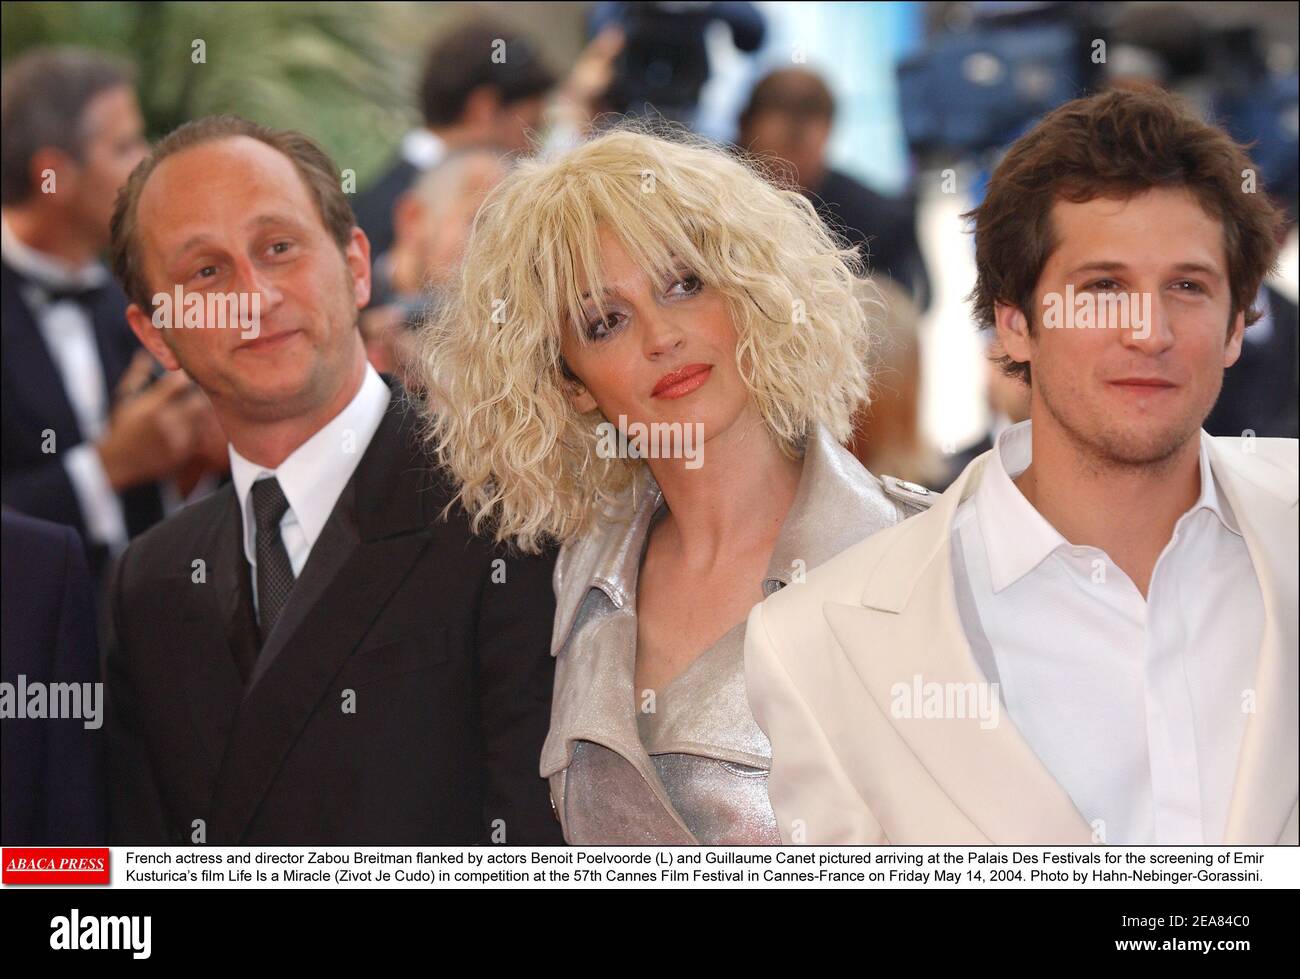 French actress and director Zabou Breitman flanked by actors Benoit Poelvoorde (L) and Guillaume Canet pictured arriving at the Palais Des Festivals for the screening of Emir Kusturica's film Life Is a Miracle (Zivot Je Cudo) in competition at the 57th Cannes Film Festival in Cannes-France on Friday May 14, 2004. Photo by Hahn-Nebinger-Gorassini. Stock Photo